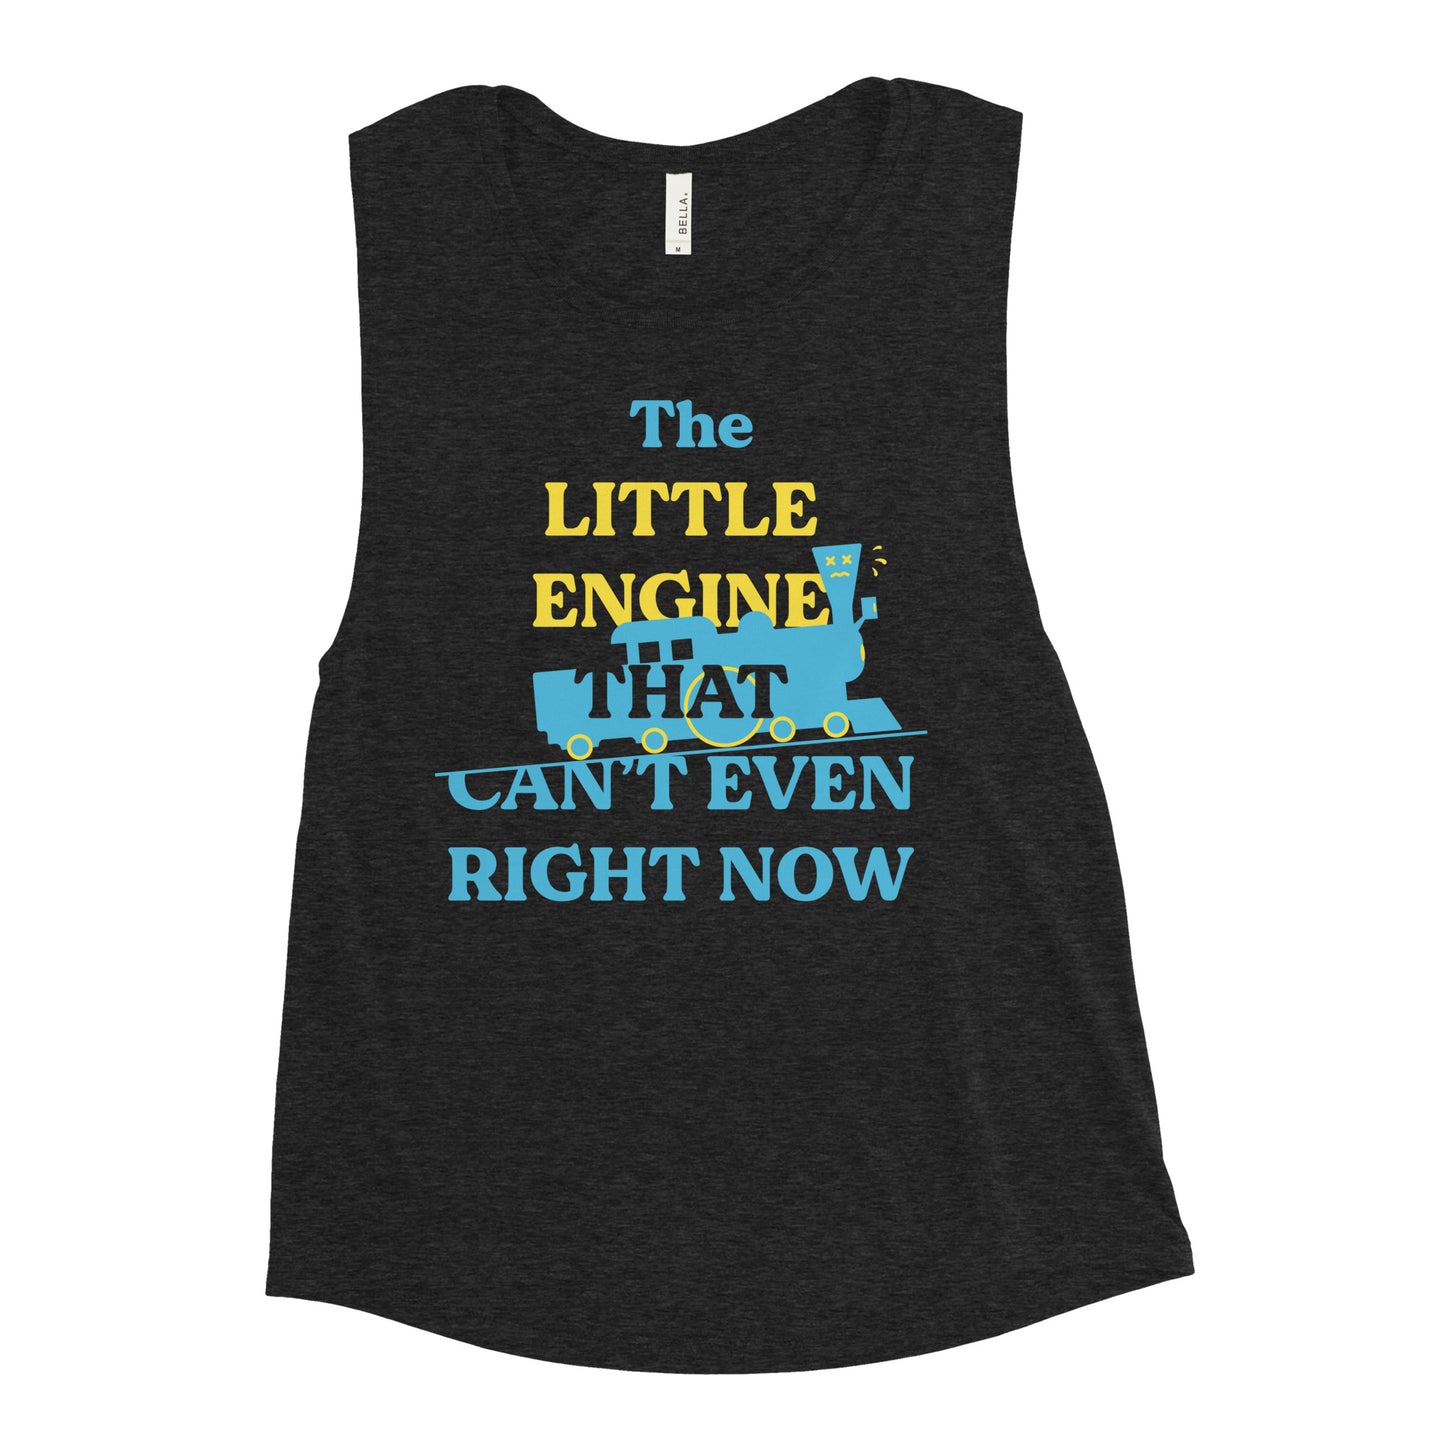 The Little Engine That Can't Even Right Now Women's Muscle Tank